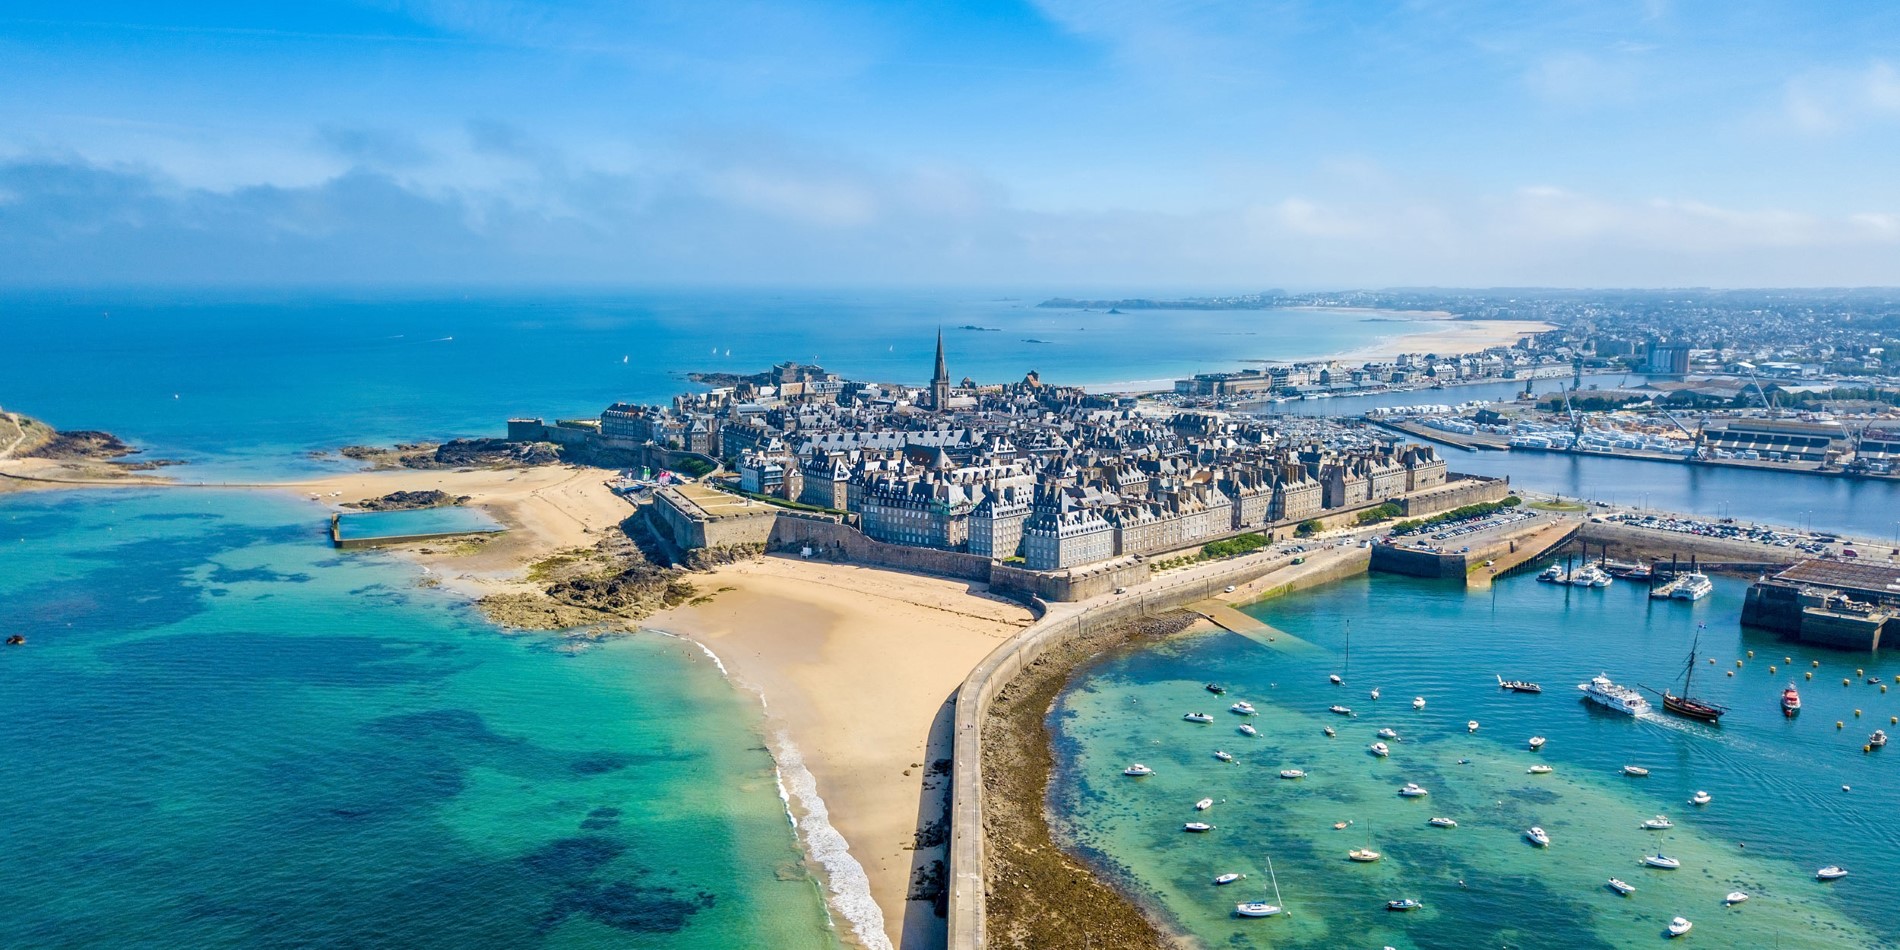 History and beauty in St. Malo.